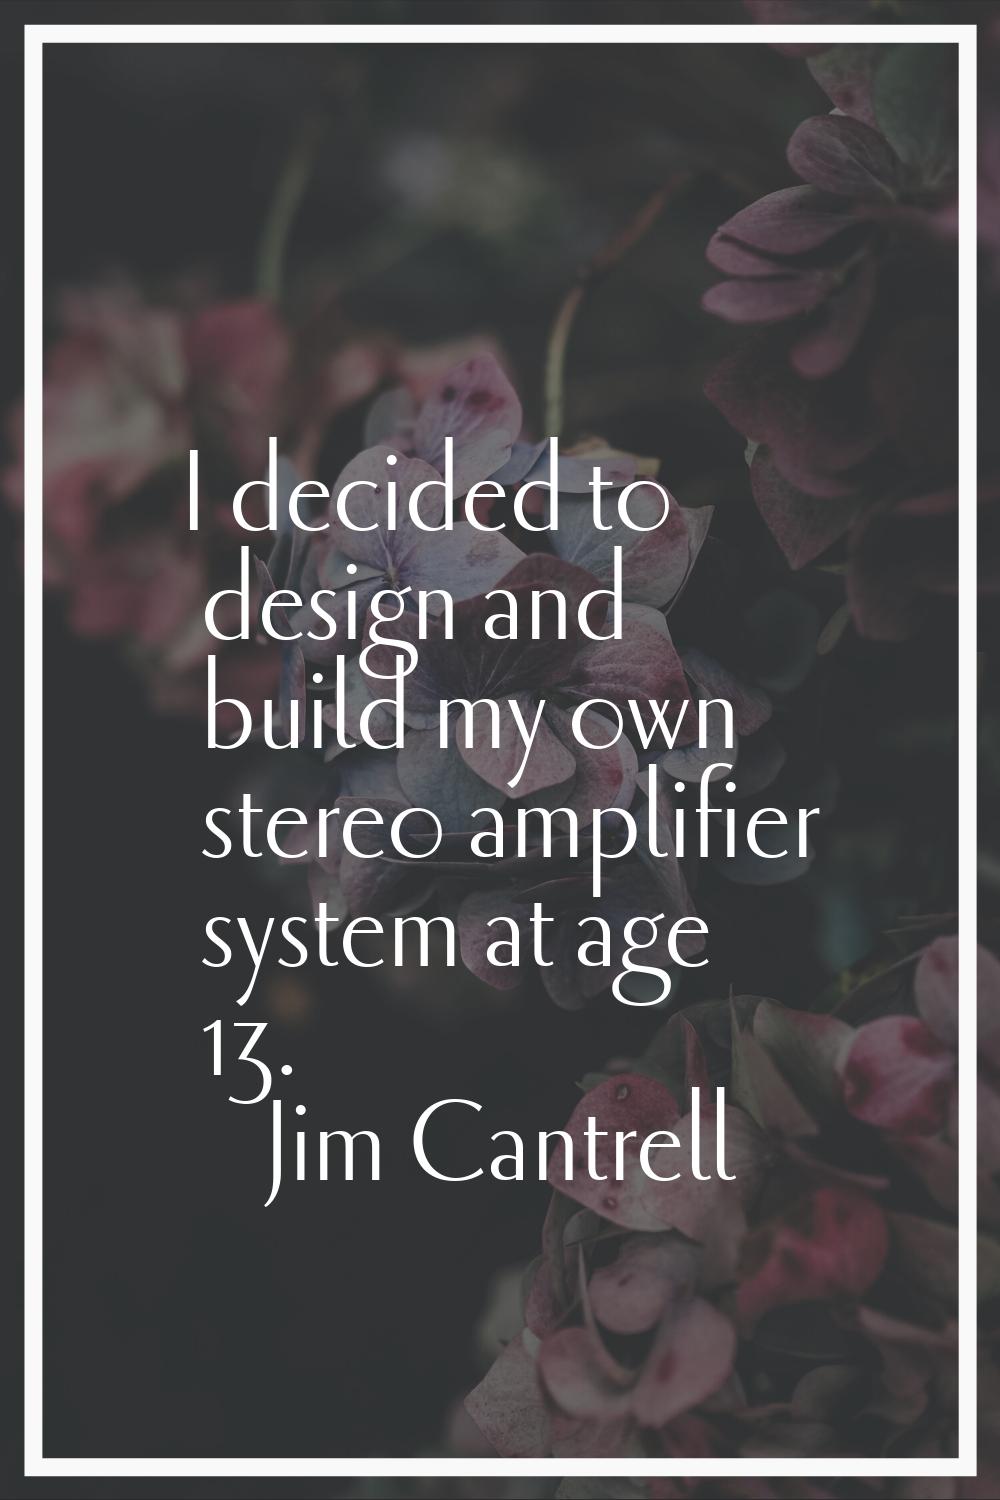 I decided to design and build my own stereo amplifier system at age 13.